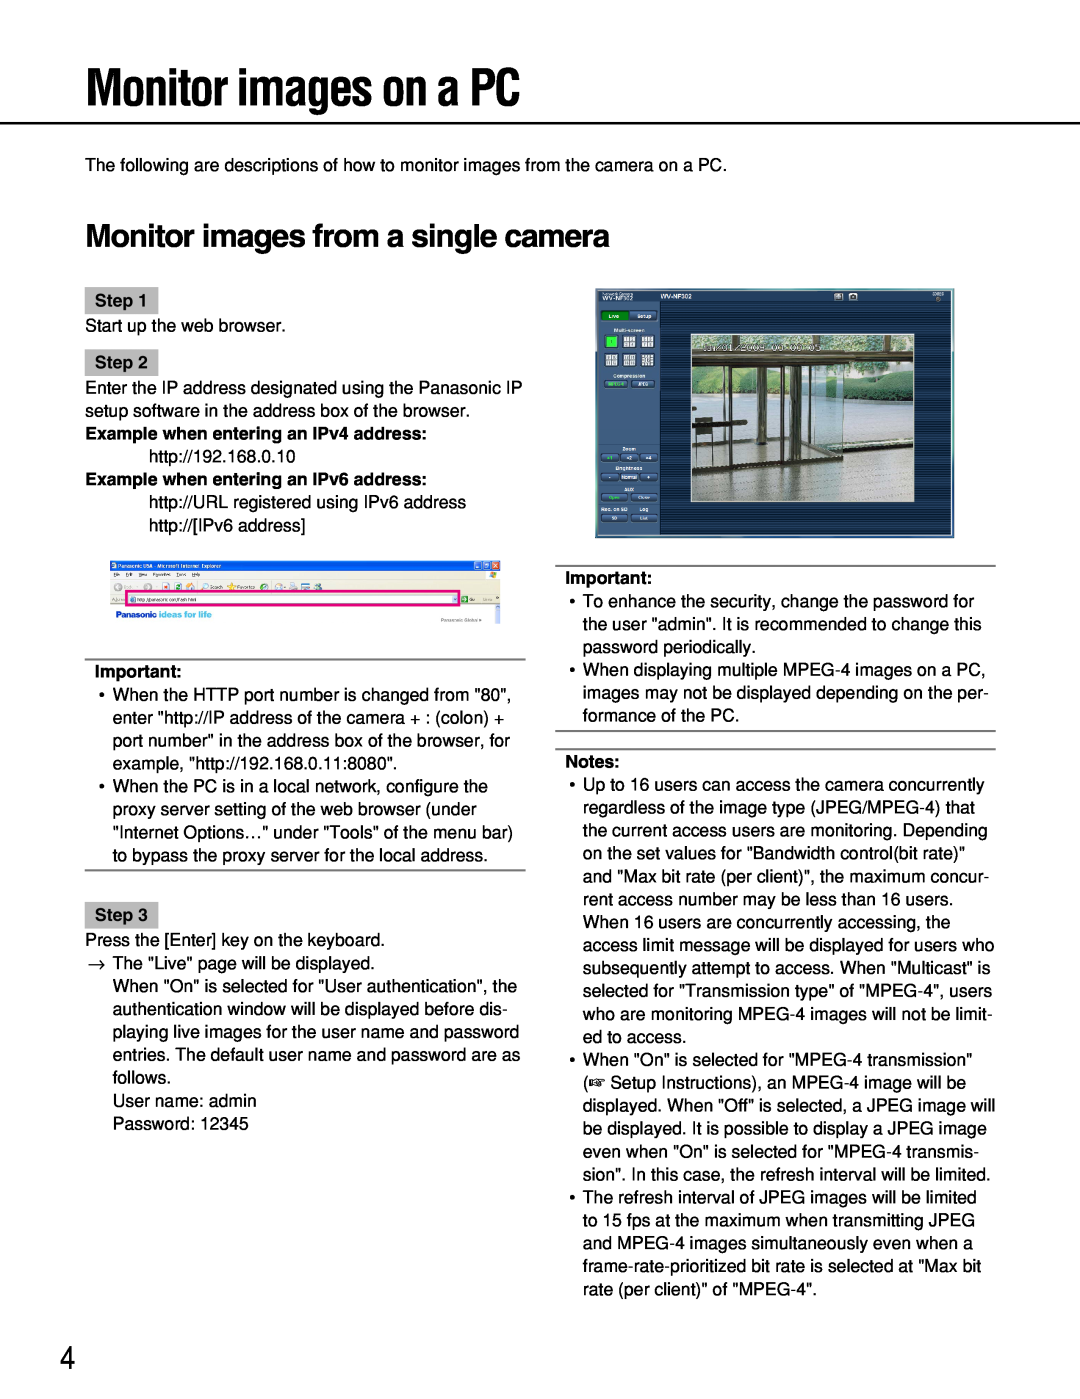 Panasonic WV-NF302 manual Monitor images on a PC, Monitor images from a single camera 